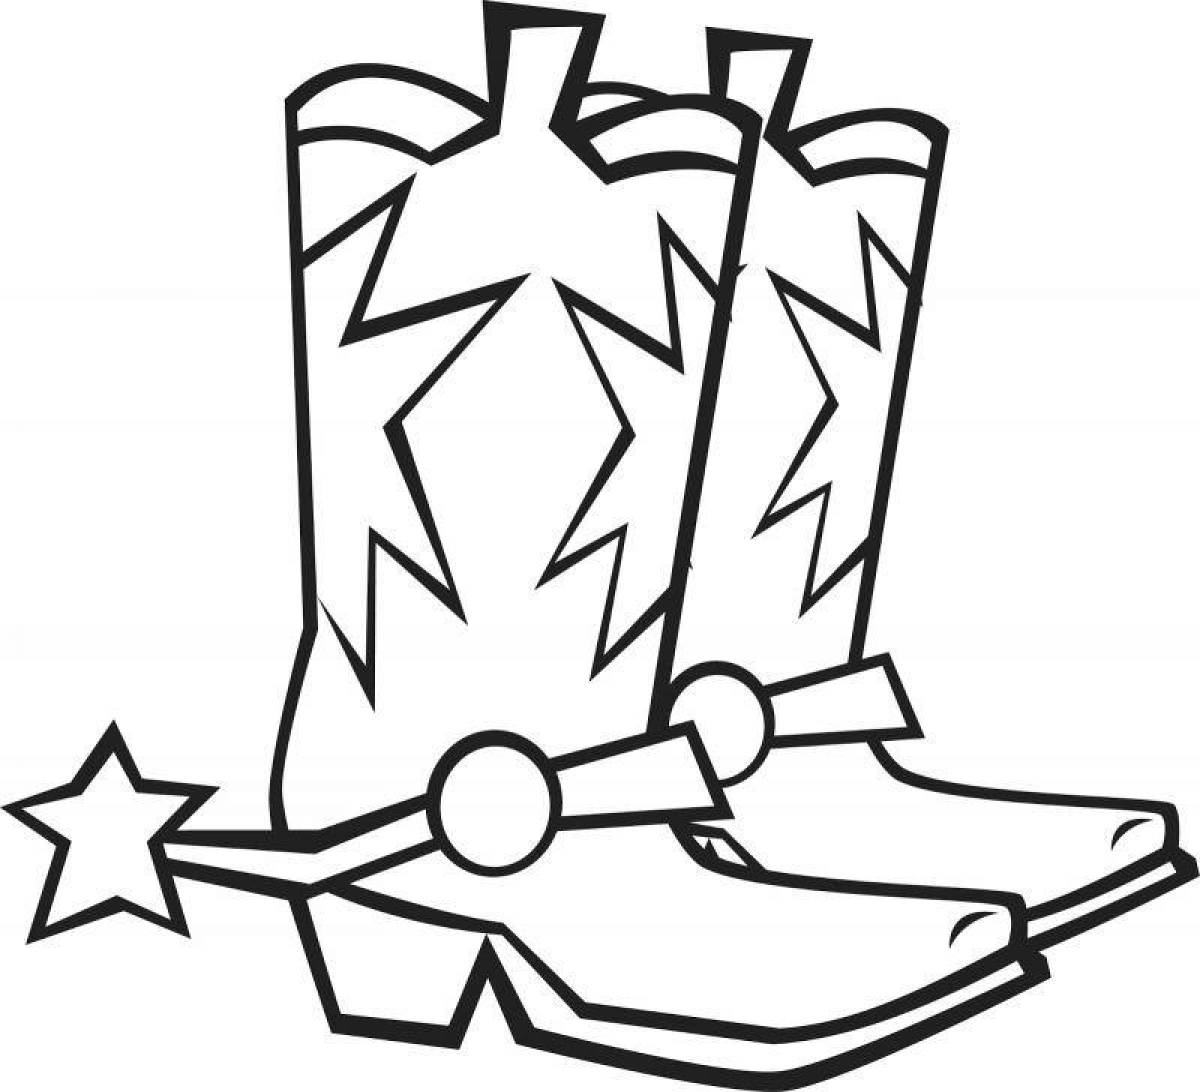 Coloring page of elegant boots